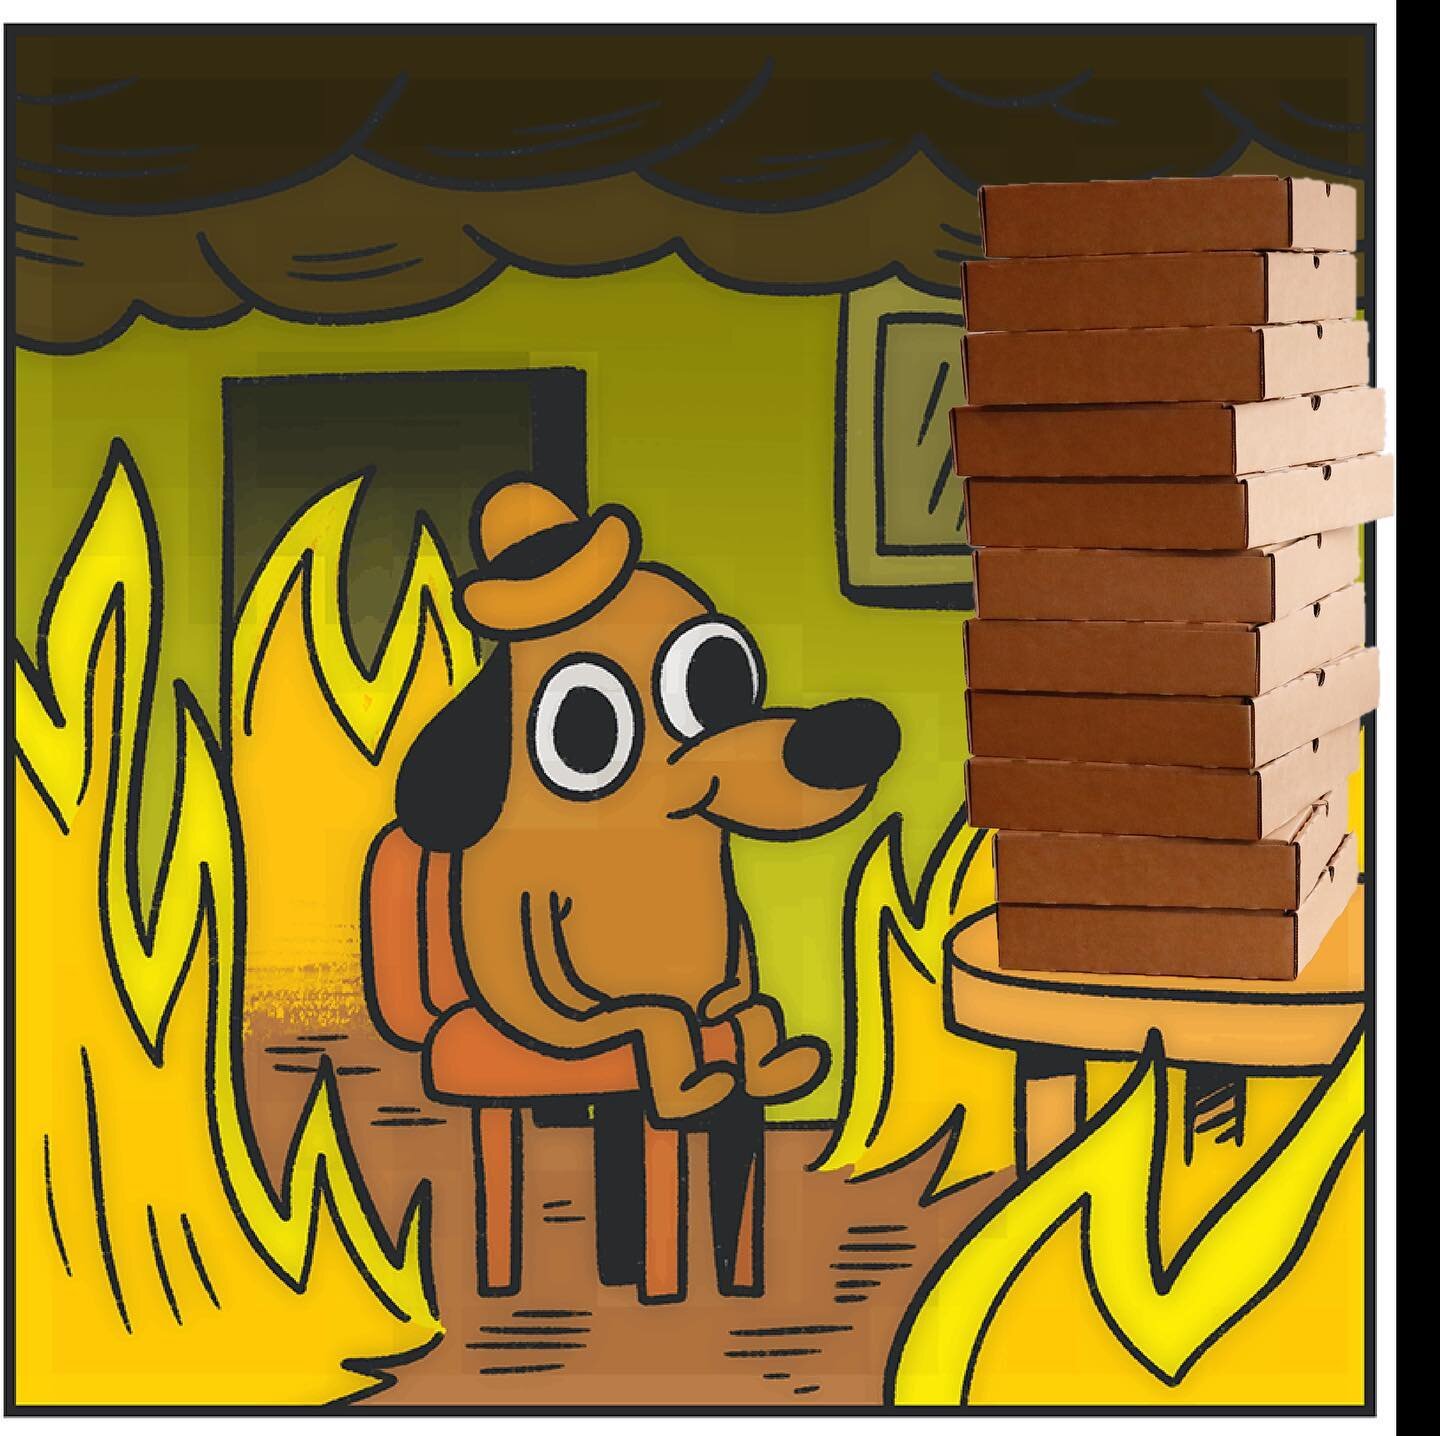 THIS IS FINE